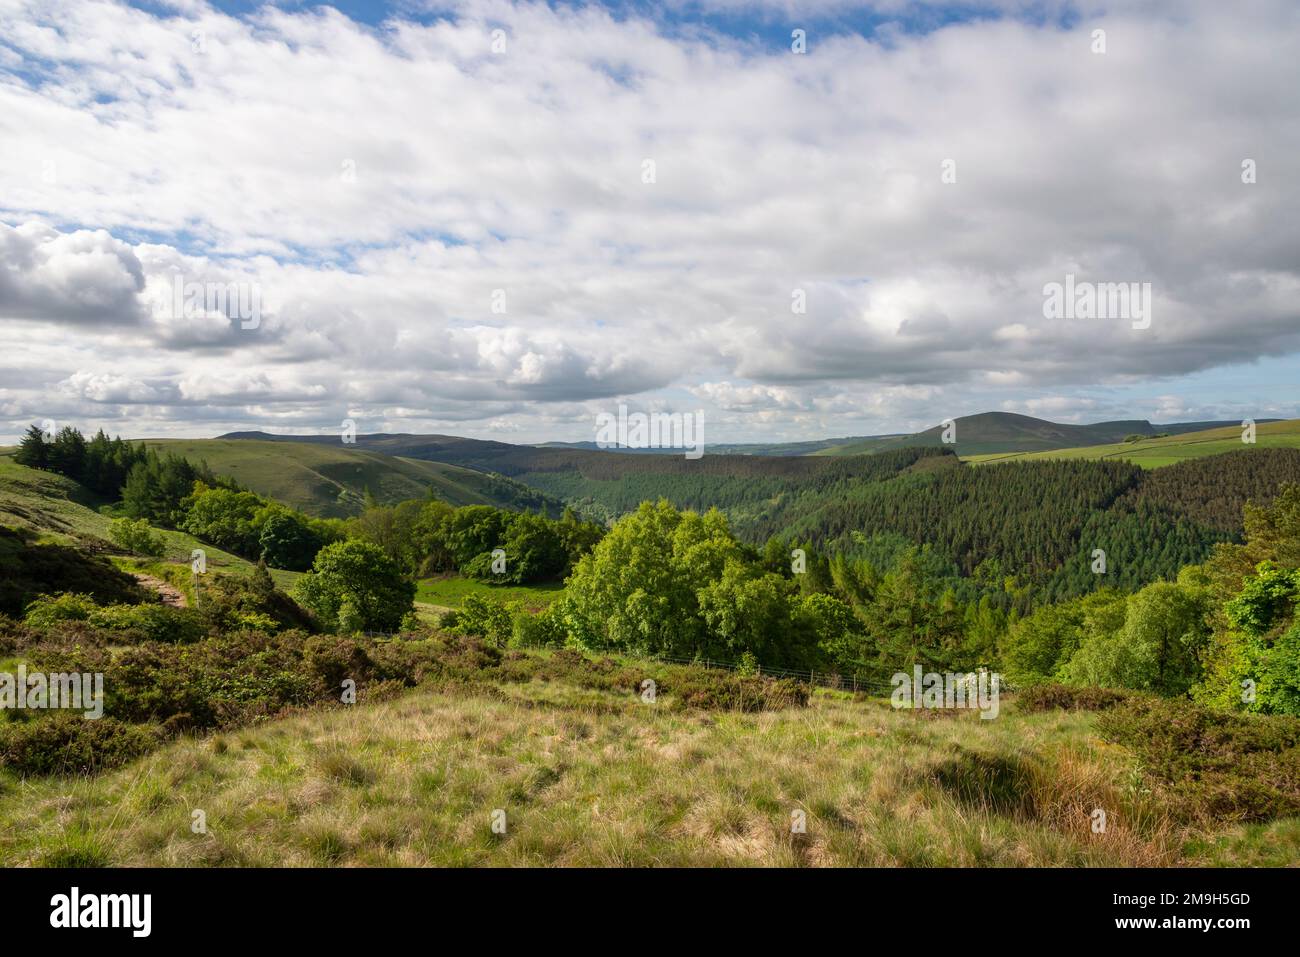 High in the Derbyshire hills above the Woodlands Valley and Snake Pass, Lose Hill in the background. Peak District national park, England. Stock Photo